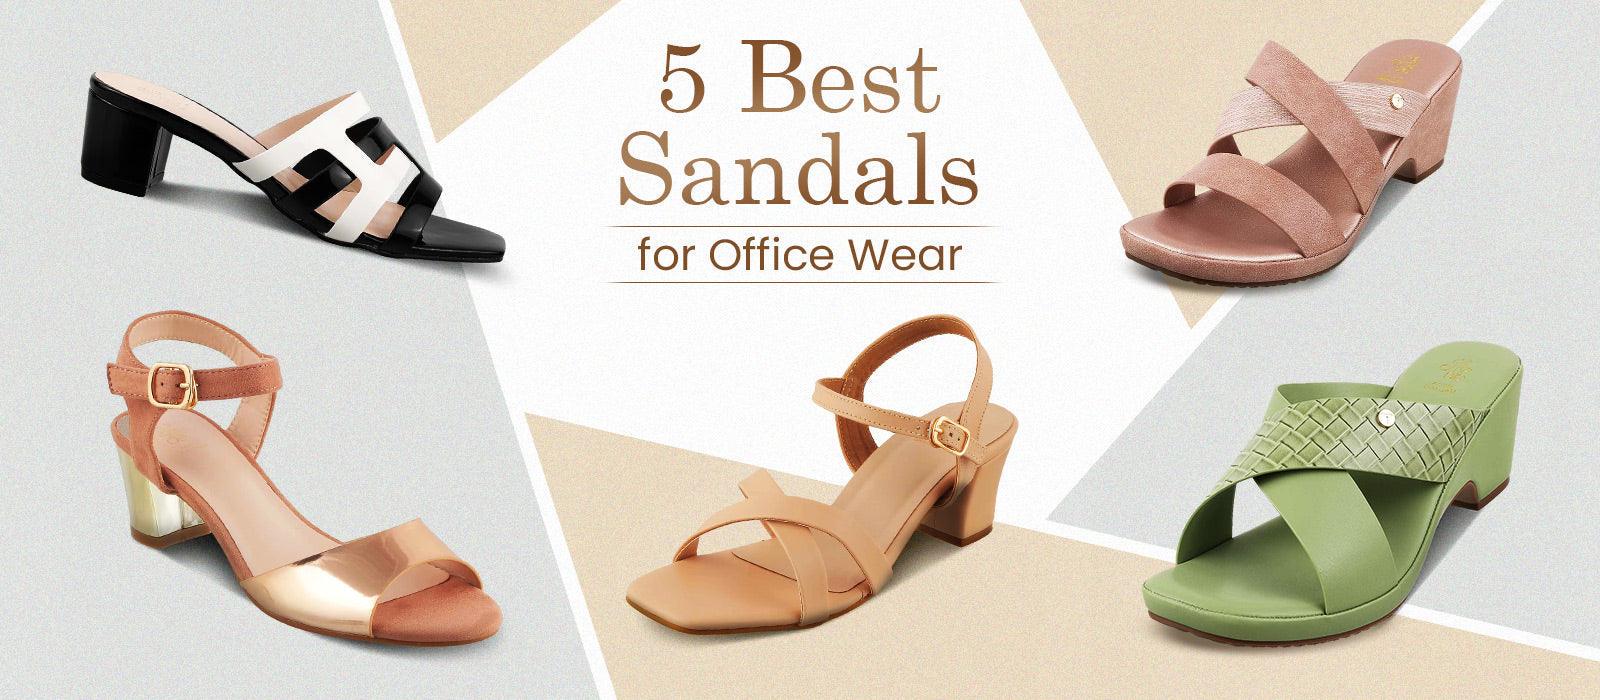 5 Best Sandals for Office Wear at Tresmode - Tresmode